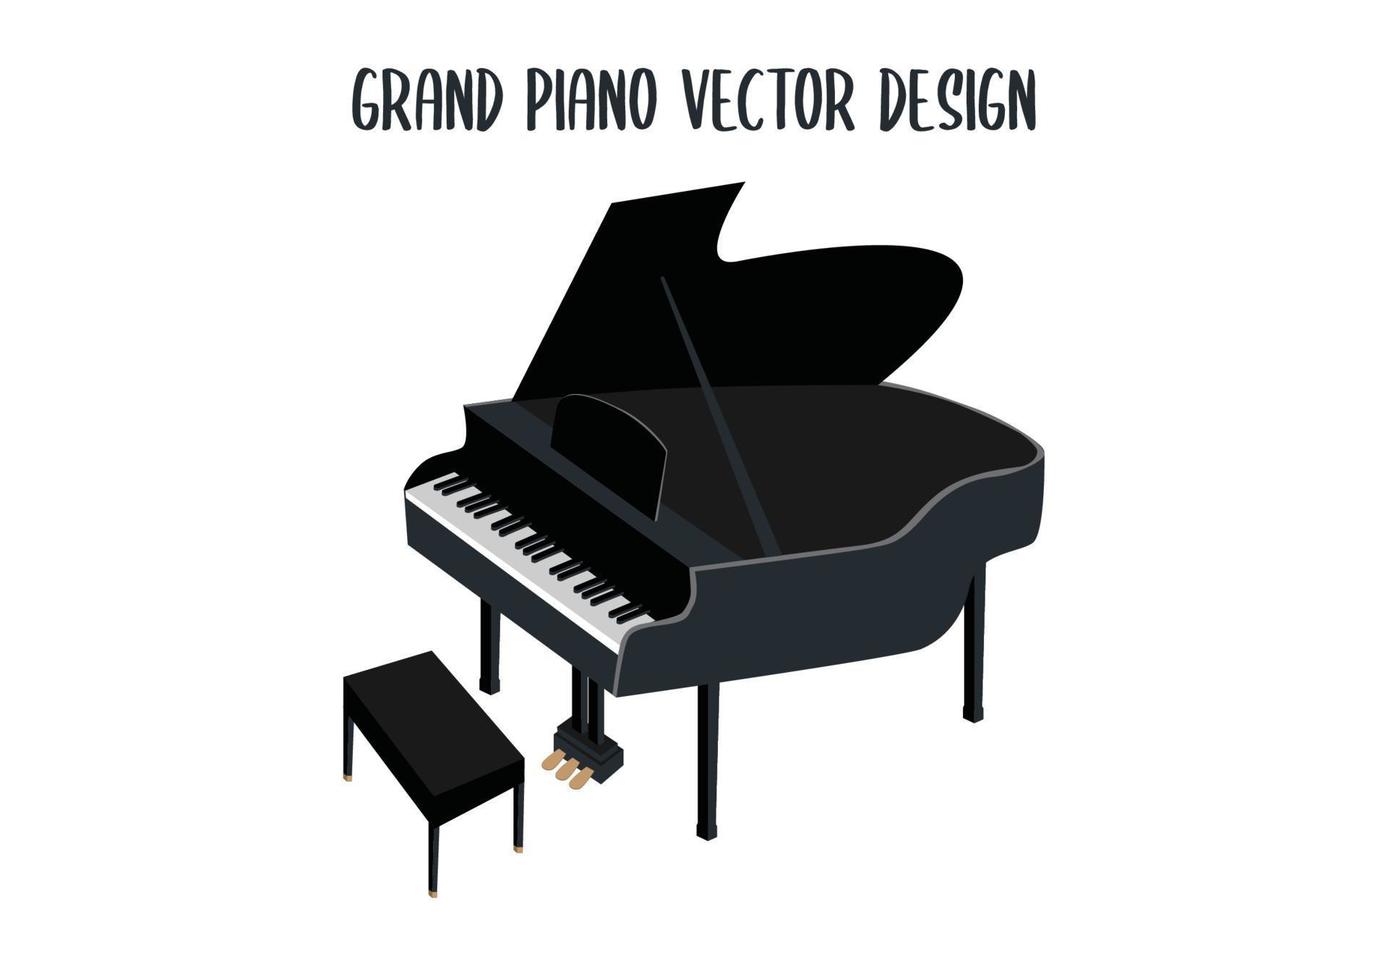 Black Grand Piano Modern Flat Vector Design. Classical Grand Piano Isolated Vector Illustration On White Background. Musical Instrument. Opening Grand Piano Hand Drawing Vector. Grand Piano Clipart